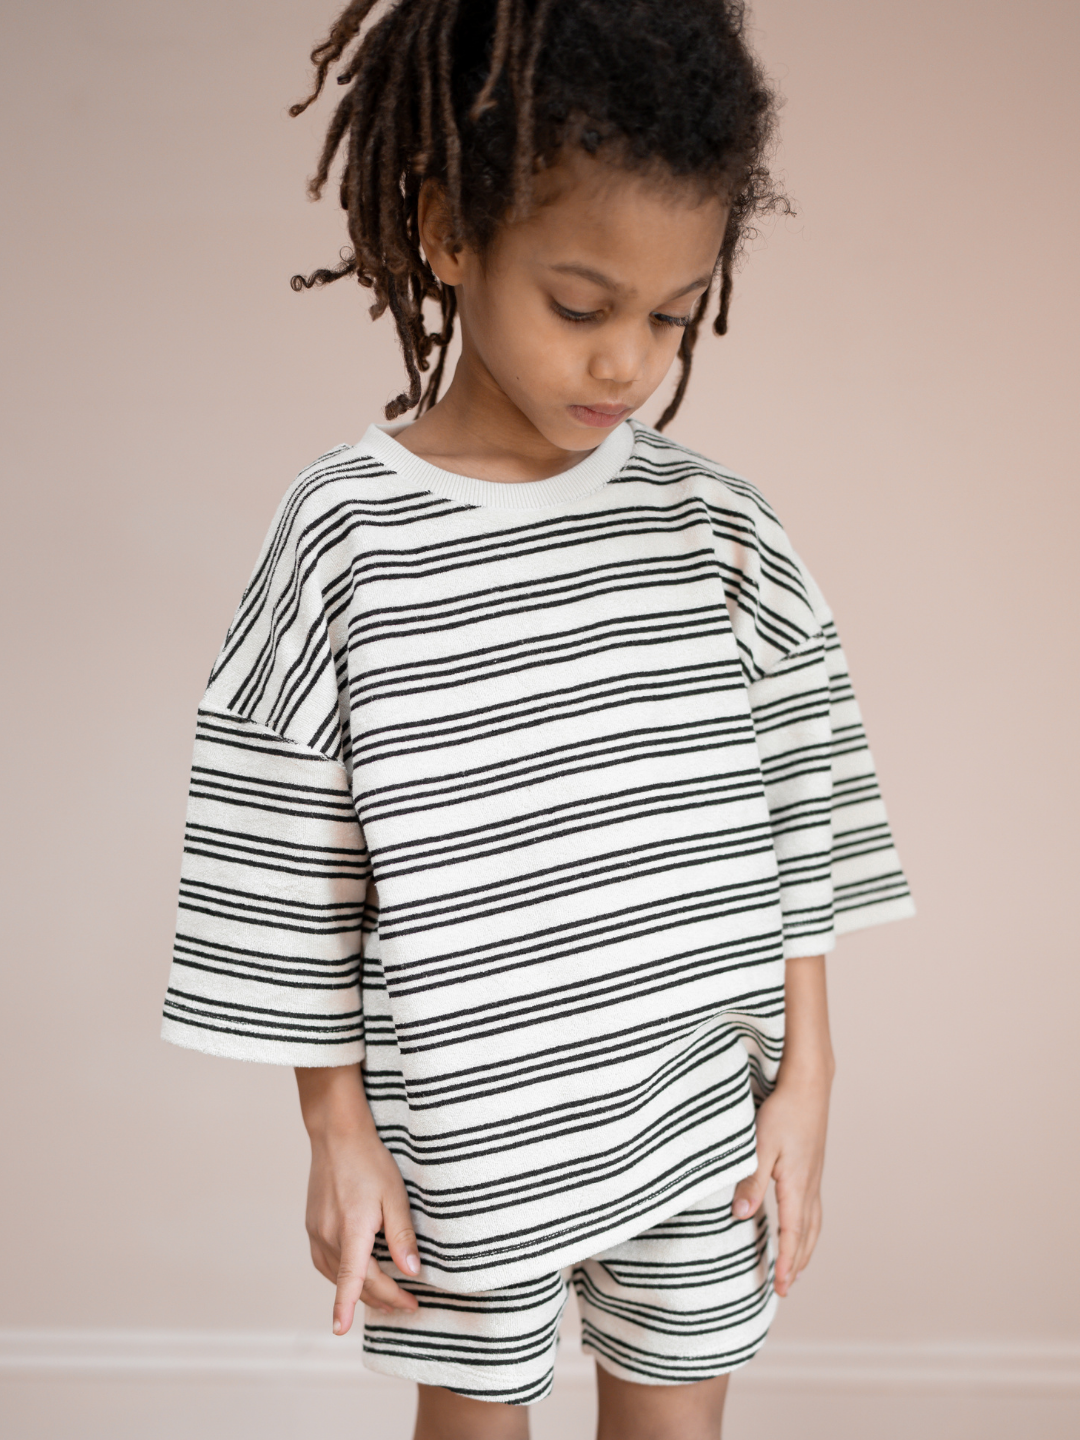 Stripe | A child is wearing matching set of stripe Terry towel shorts & tee